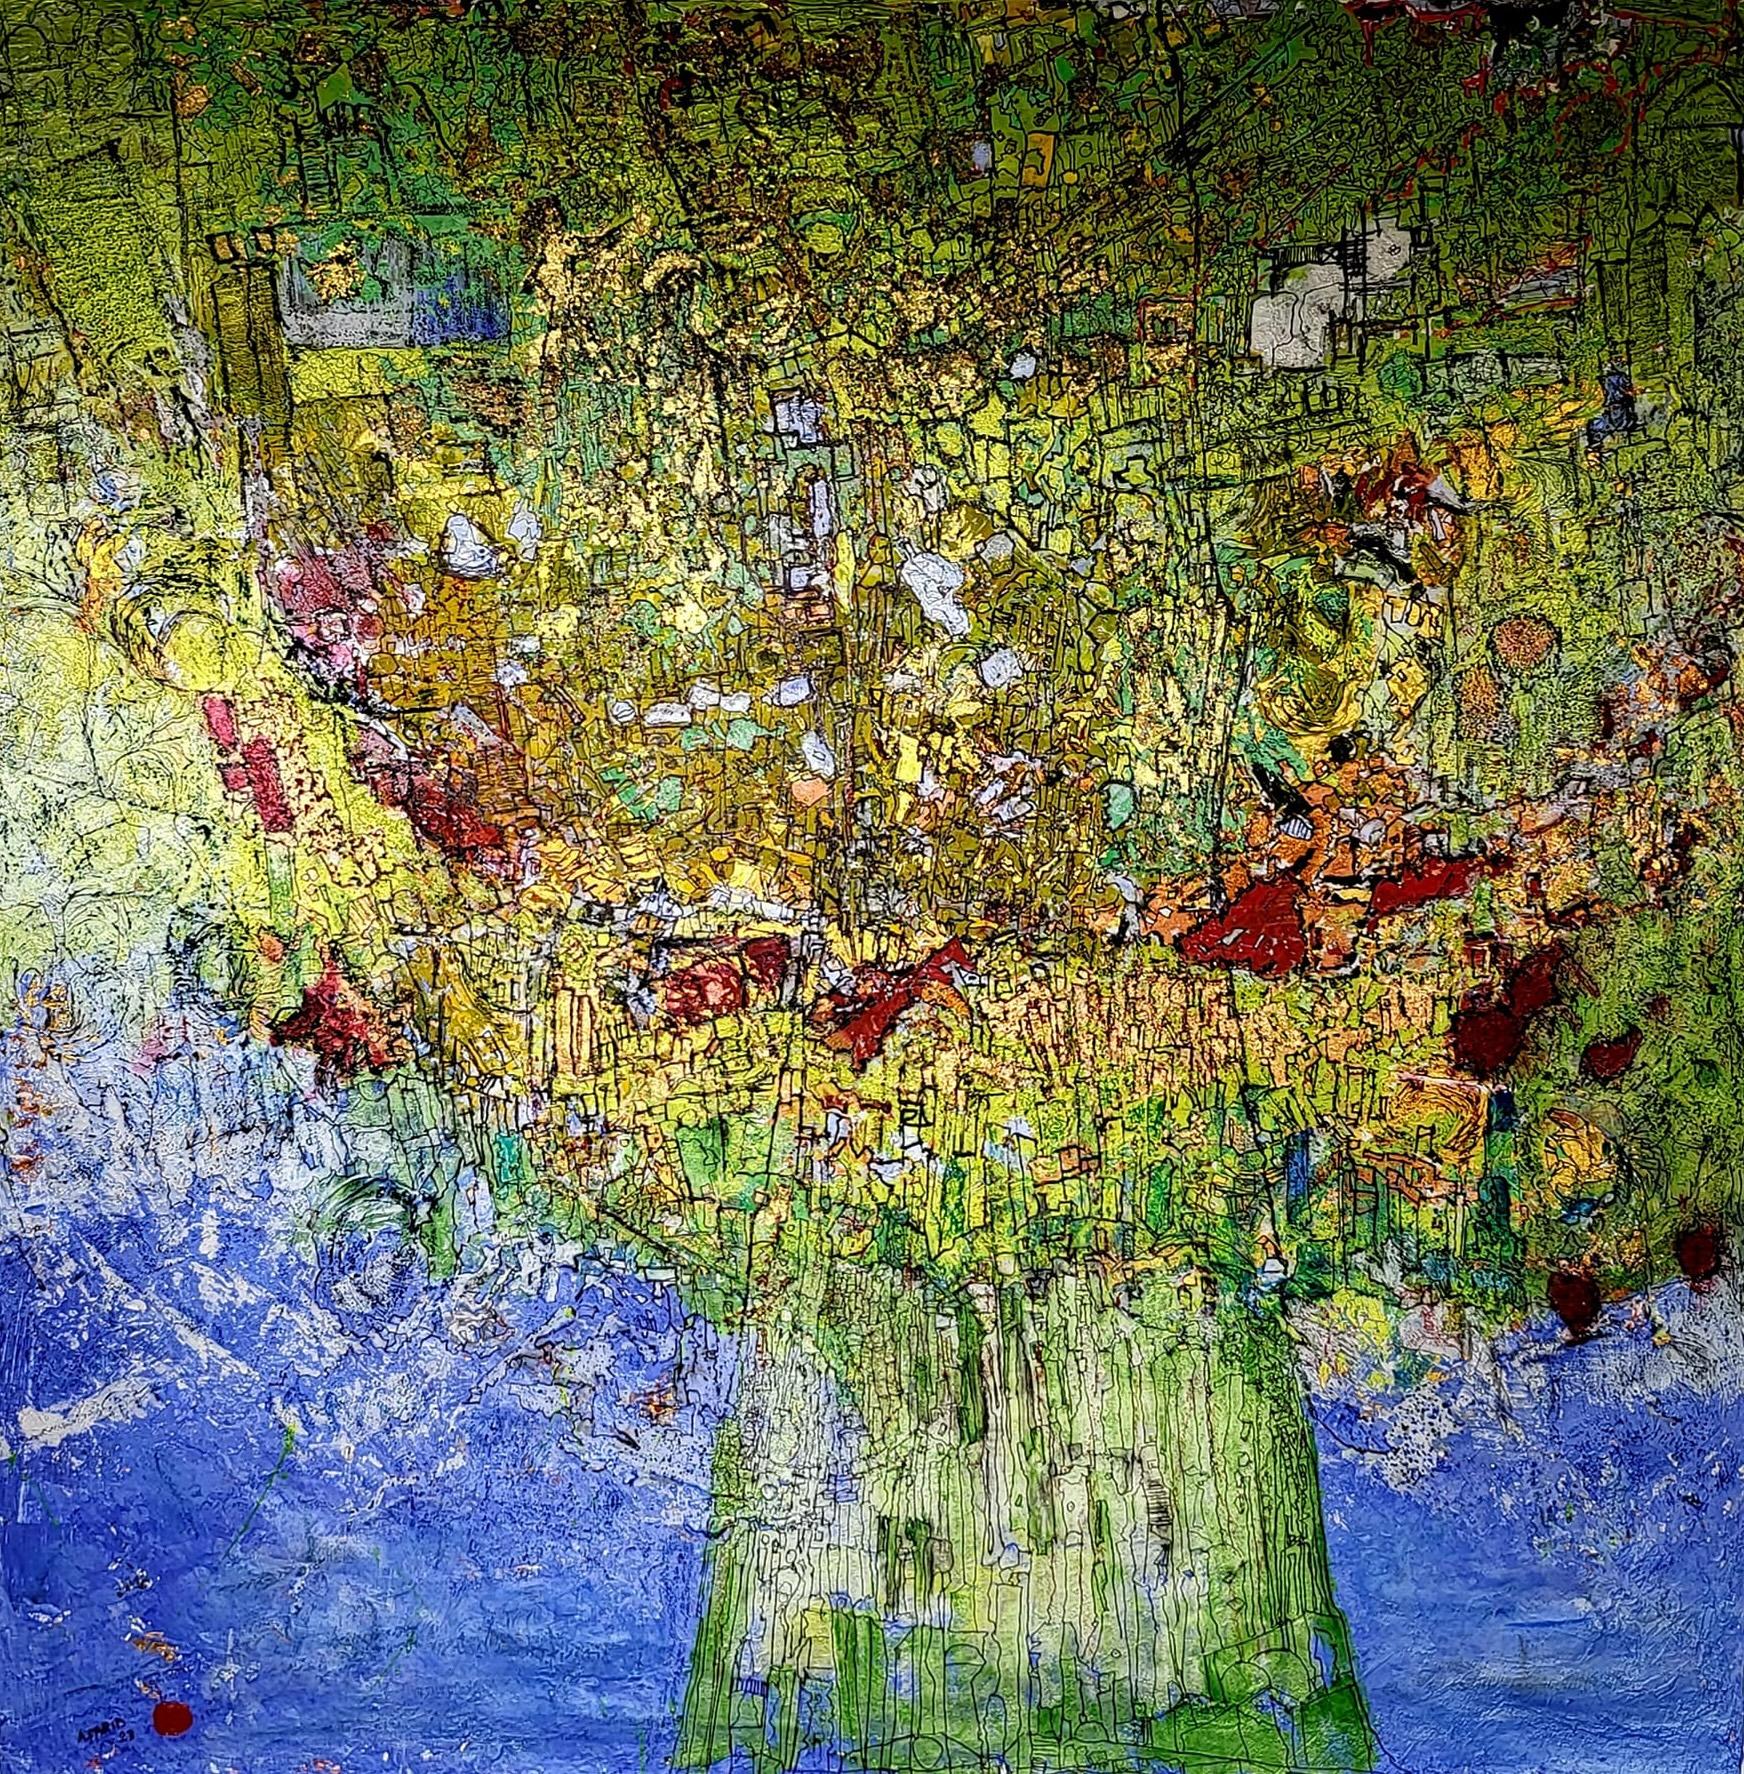 "Arboreal" Abstract Mixed Media Painting 59" x 59" inch by Ahmed Farid

mixed media on canvas

Born in Cairo, Egypt, in 1950 where he currently lives and works, Farid is an autodidact Egyptian painters who trained privately in immersion